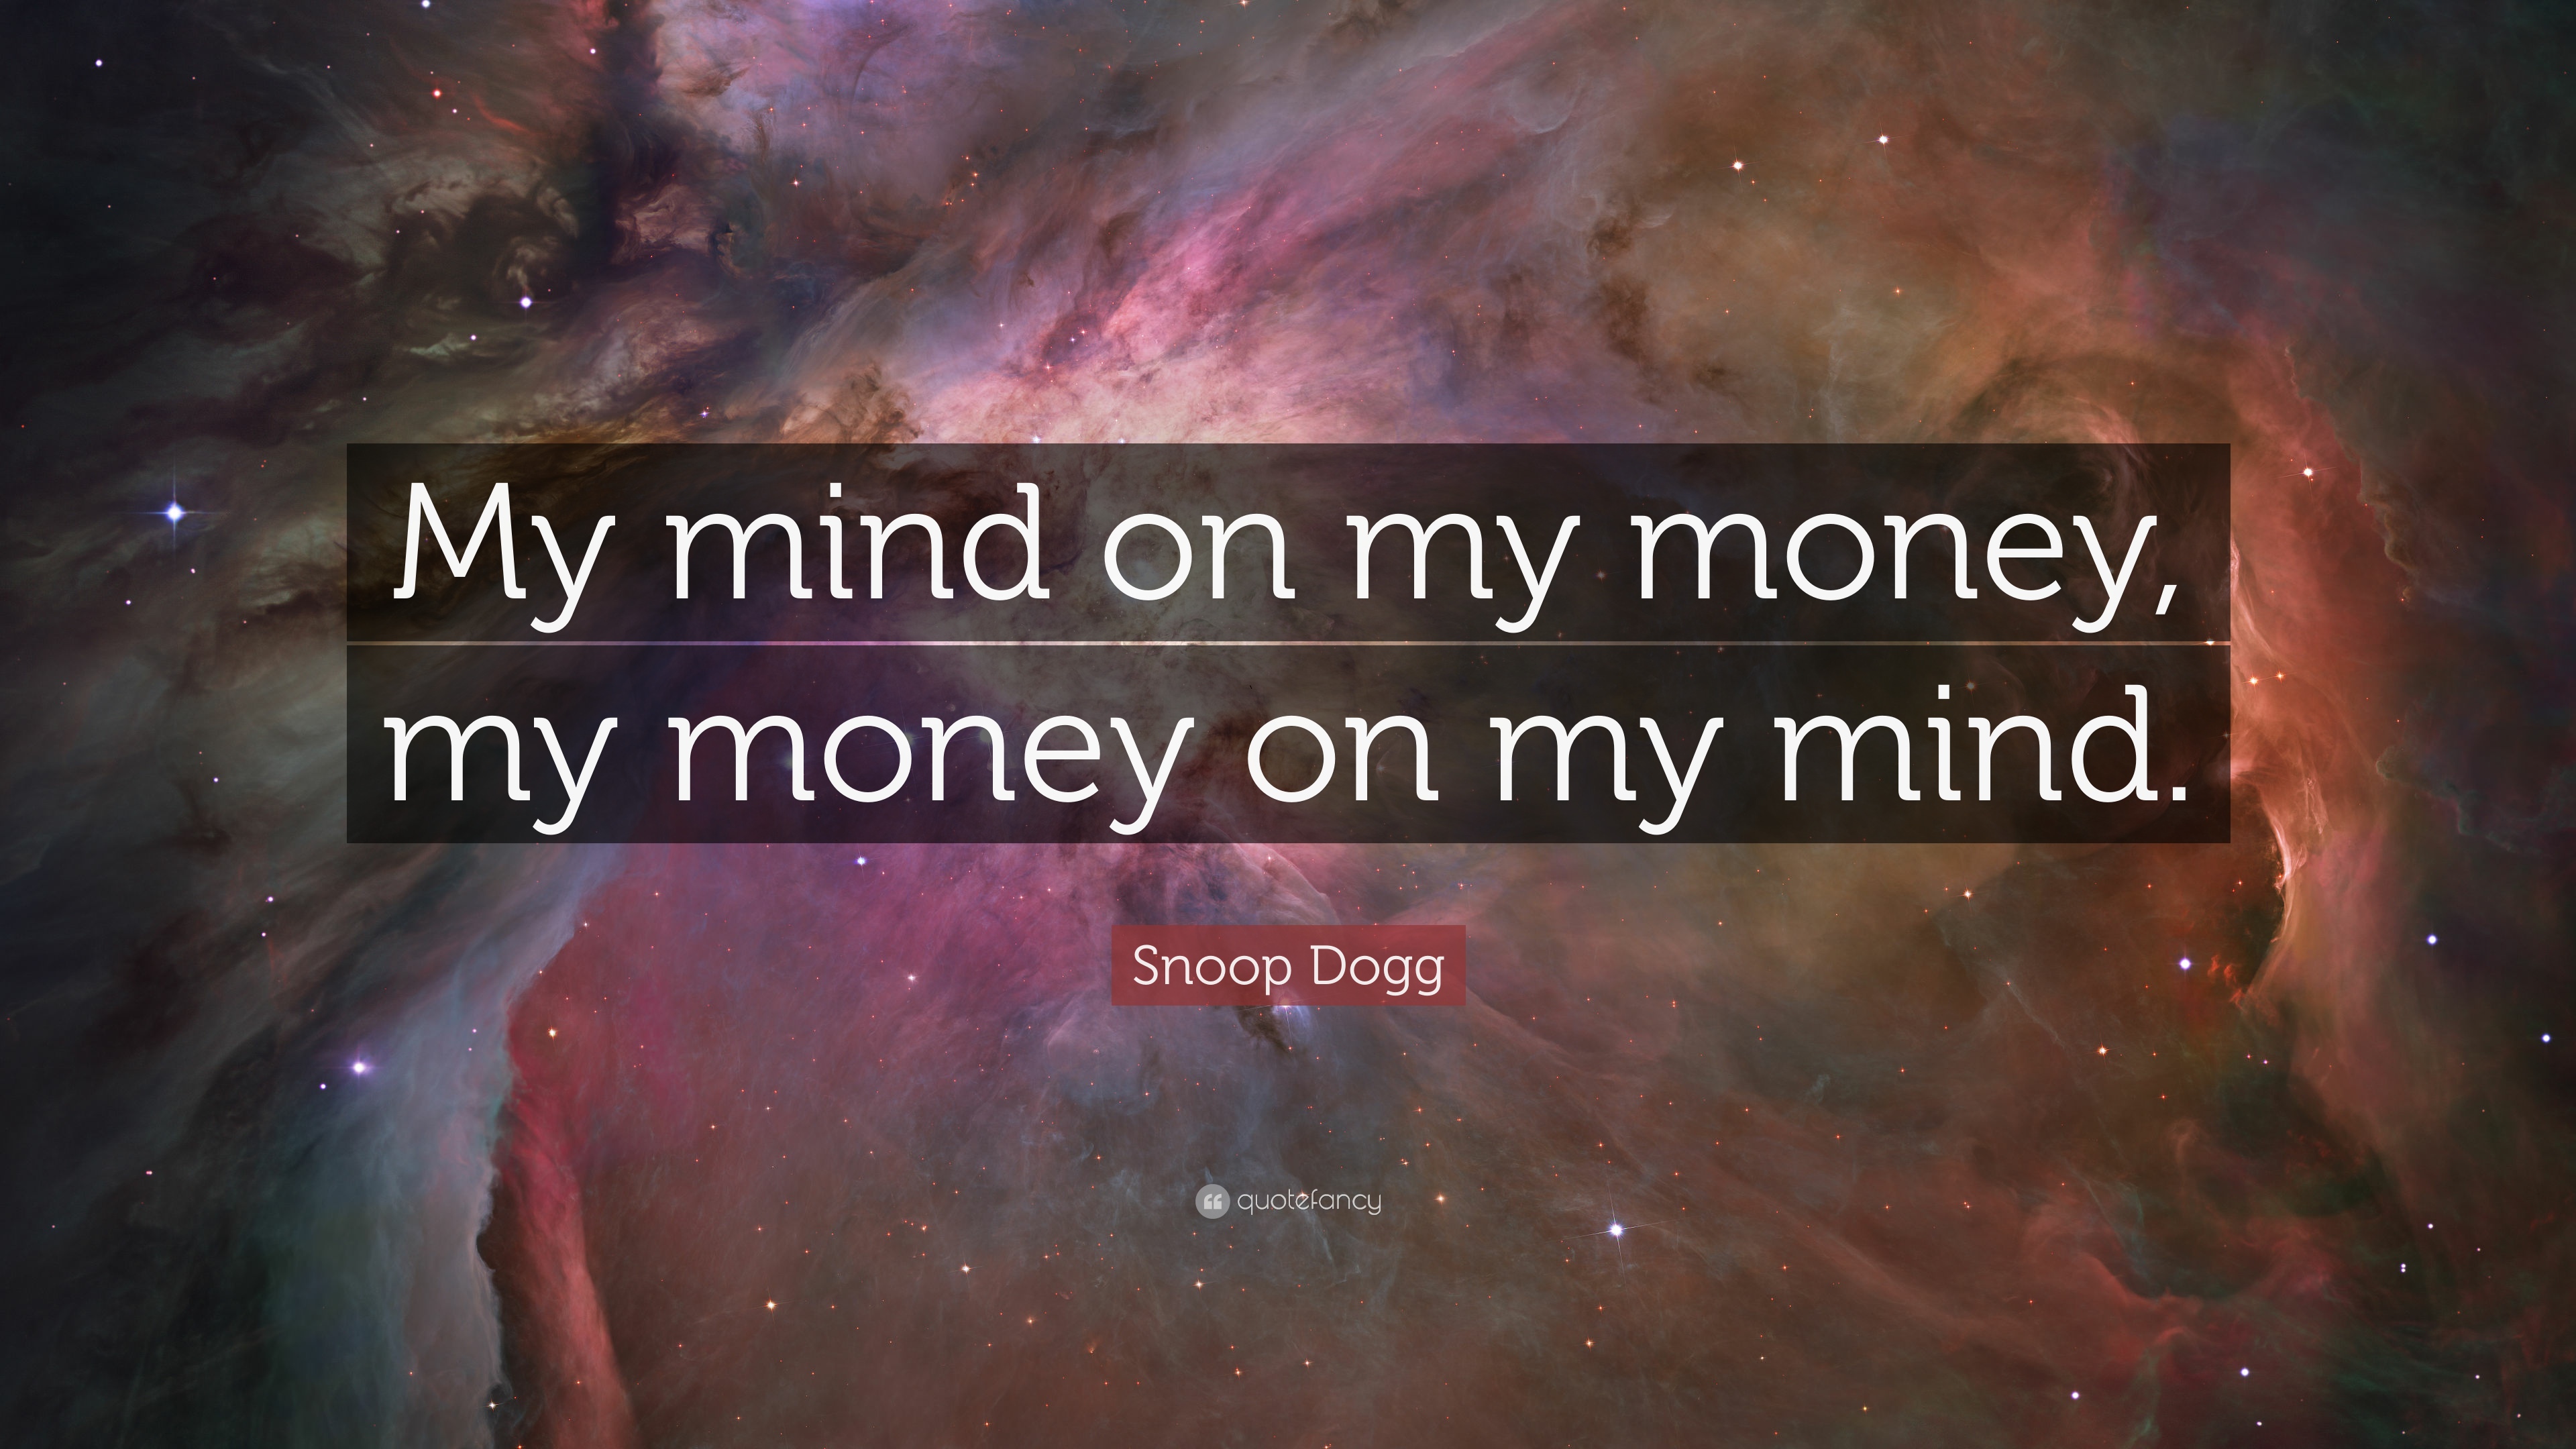 10 Best Snoop Dogg Quotes